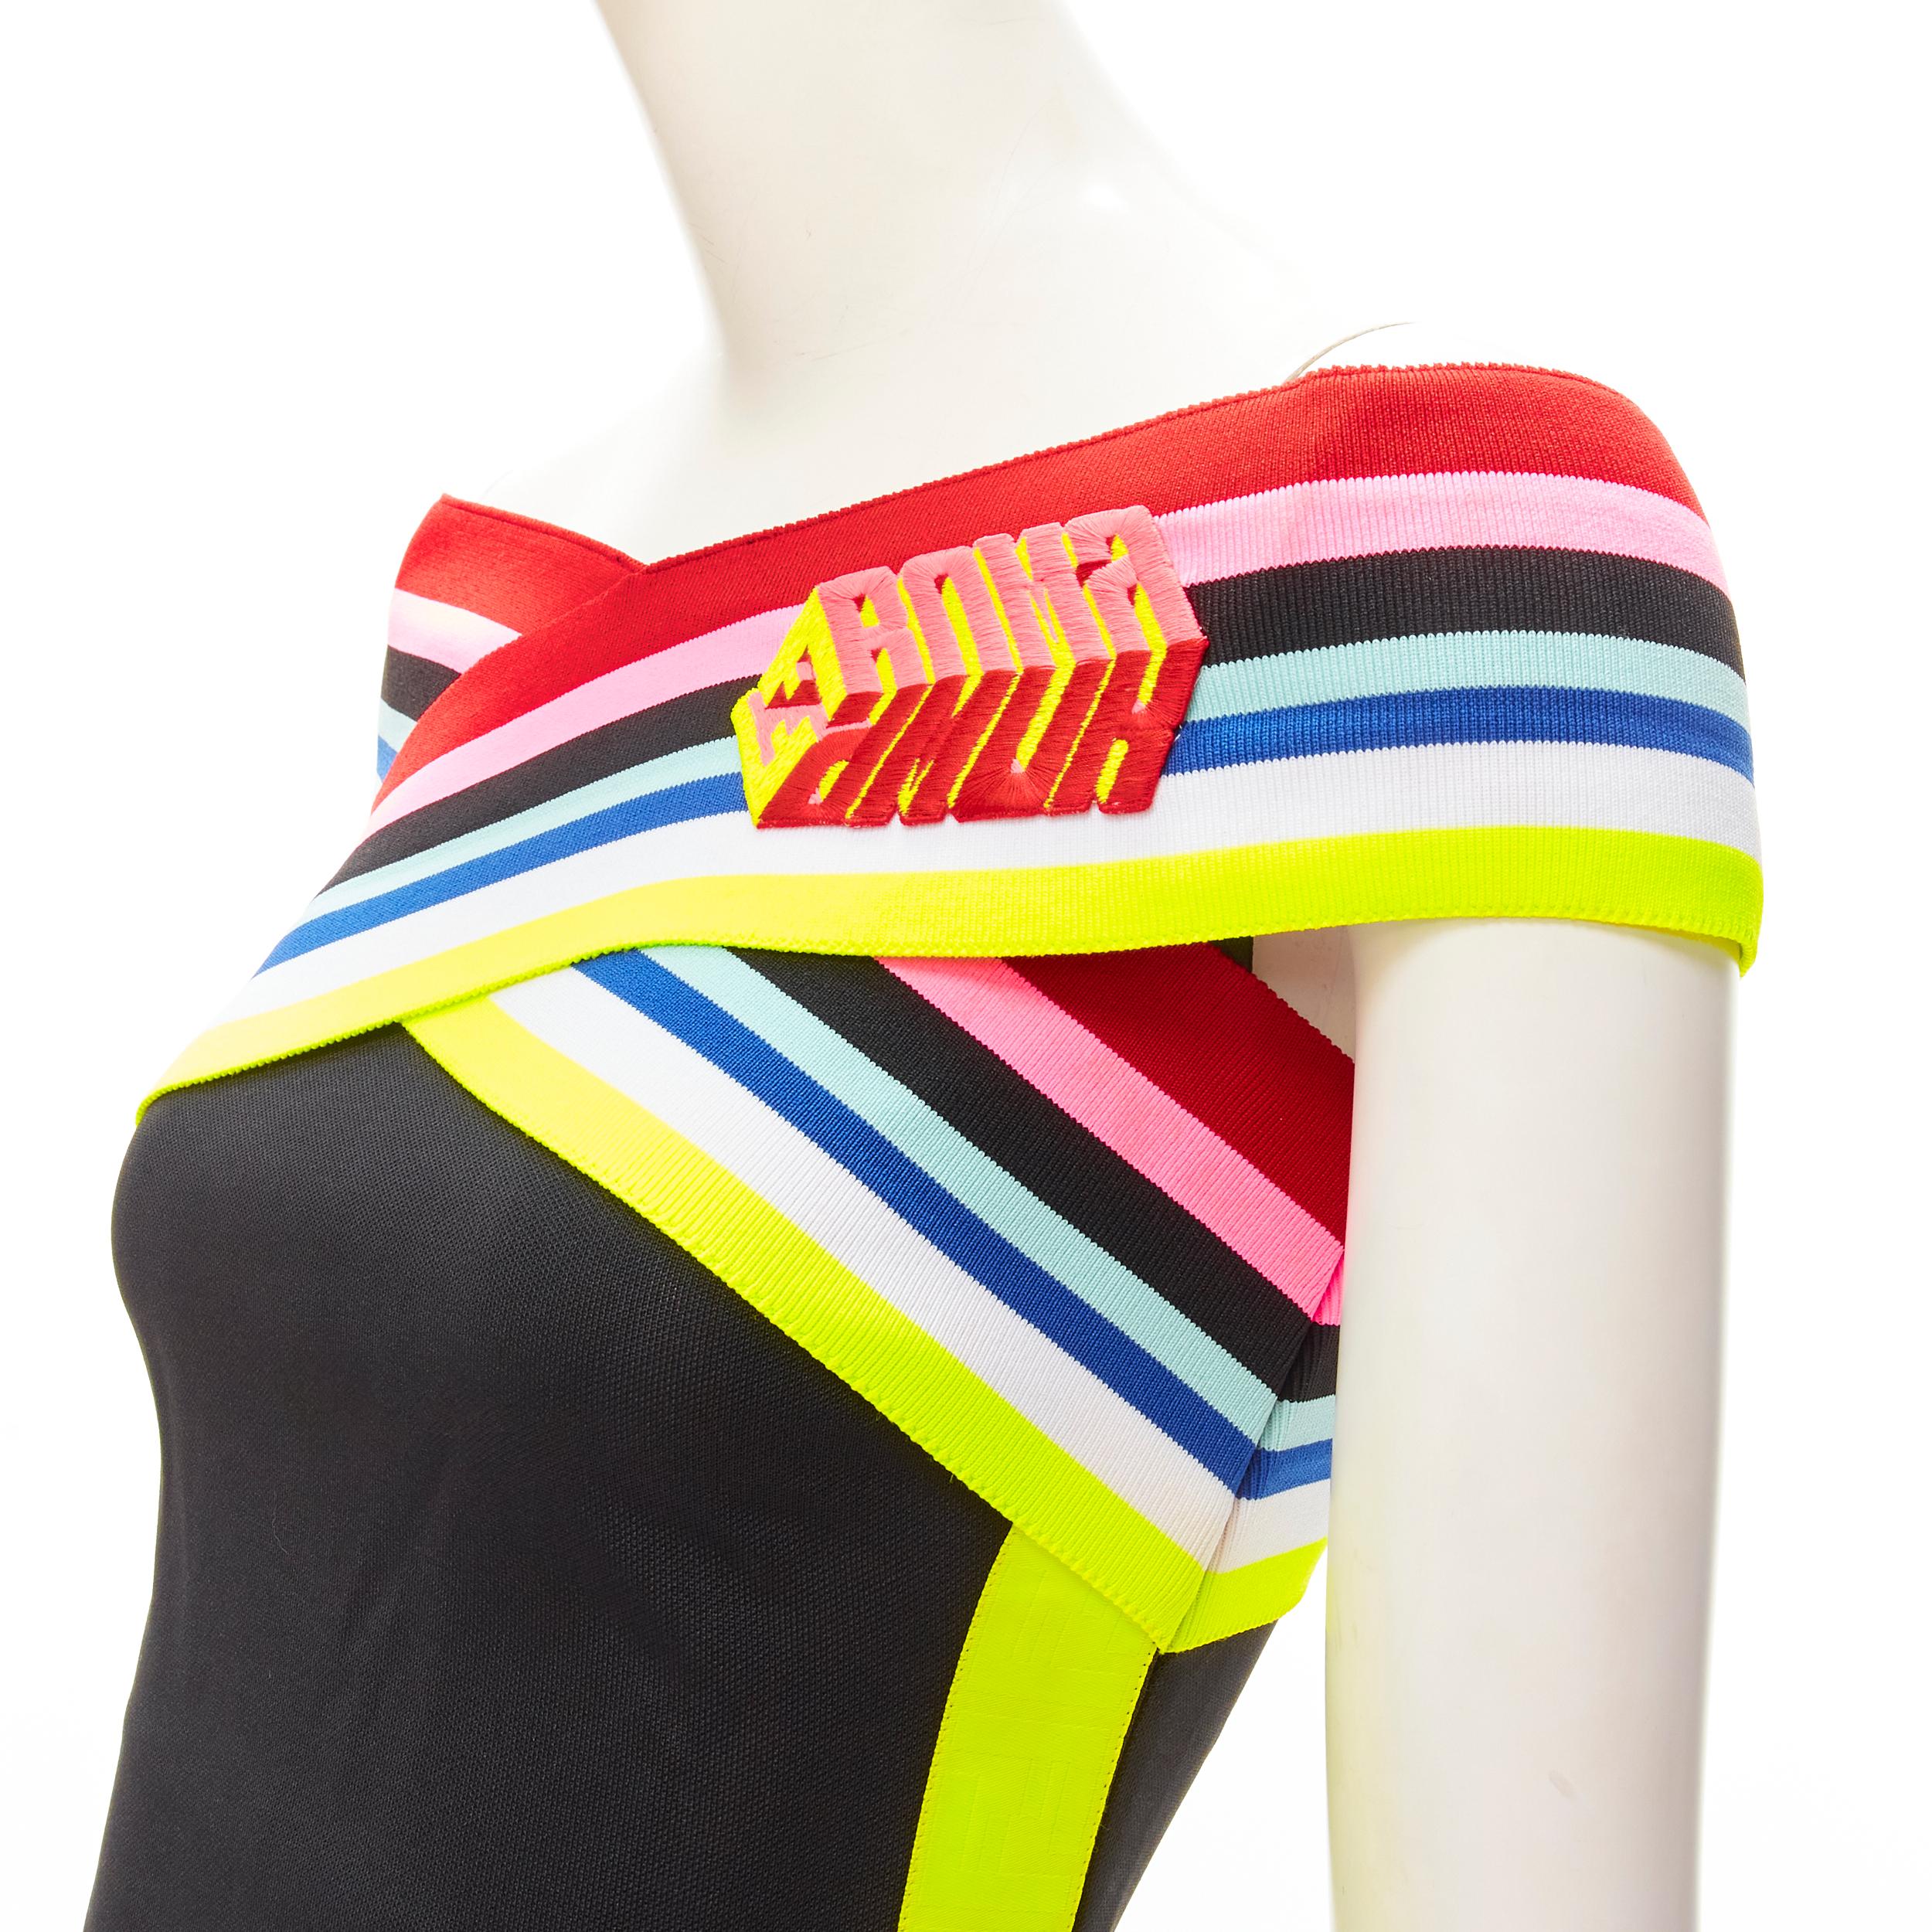 FENDI Roma Amor neon cross strap FF Zucca black bodycon dress XS
Brand: Fendi
Collection: Roma Amor 
Material: Polyester
Color: Black
Pattern: Solid
Extra Detail: X-cross straps with Roma Amor logo embroidery. FF Zucca monogram in neon yellow trim